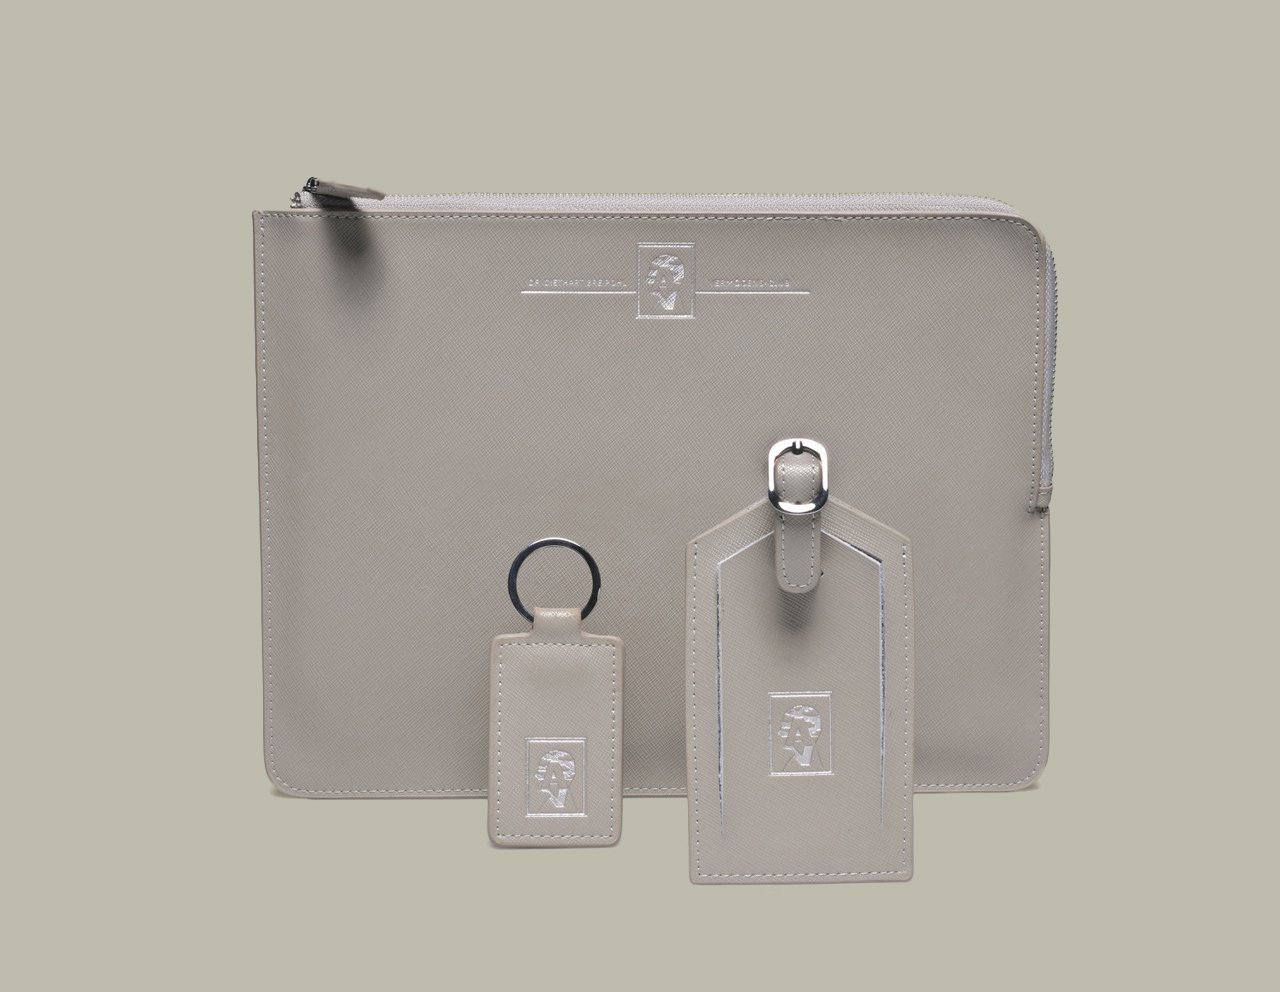 brandcraft_privatelabel_merchandise_agency_supplier_logo_embossing_debossing_embossing_stamping_leather_artificial_leather_pu_packaging_packaging_packaging_document_file_key_hanger_case_hanger_luggagetag_keychain_allianz_AJH_0564.jpg